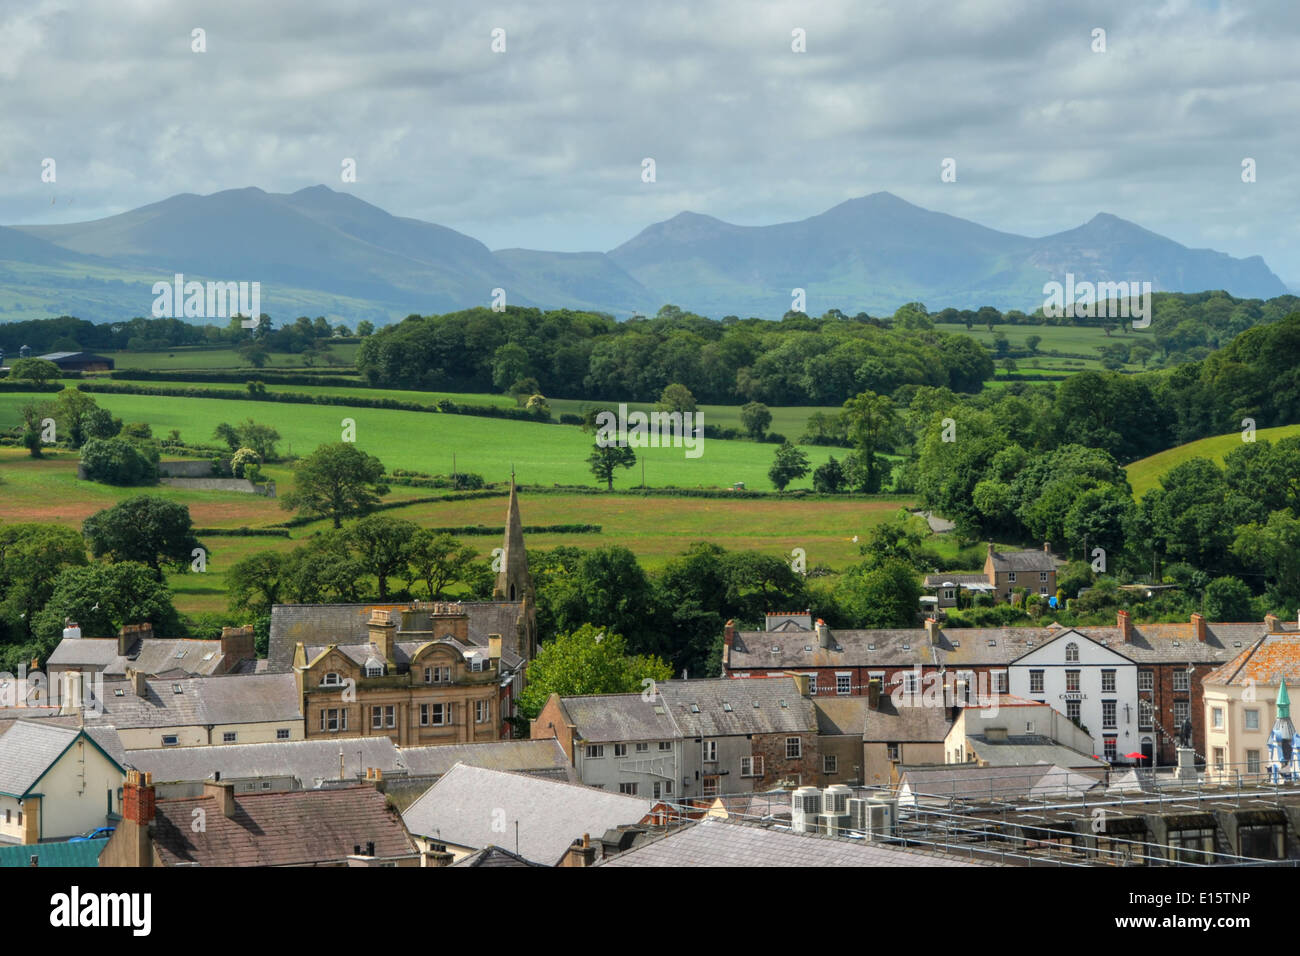 The outskirts of Caernarfon, with foothills of the Snowdonia Mountain Range in the distance Stock Photo